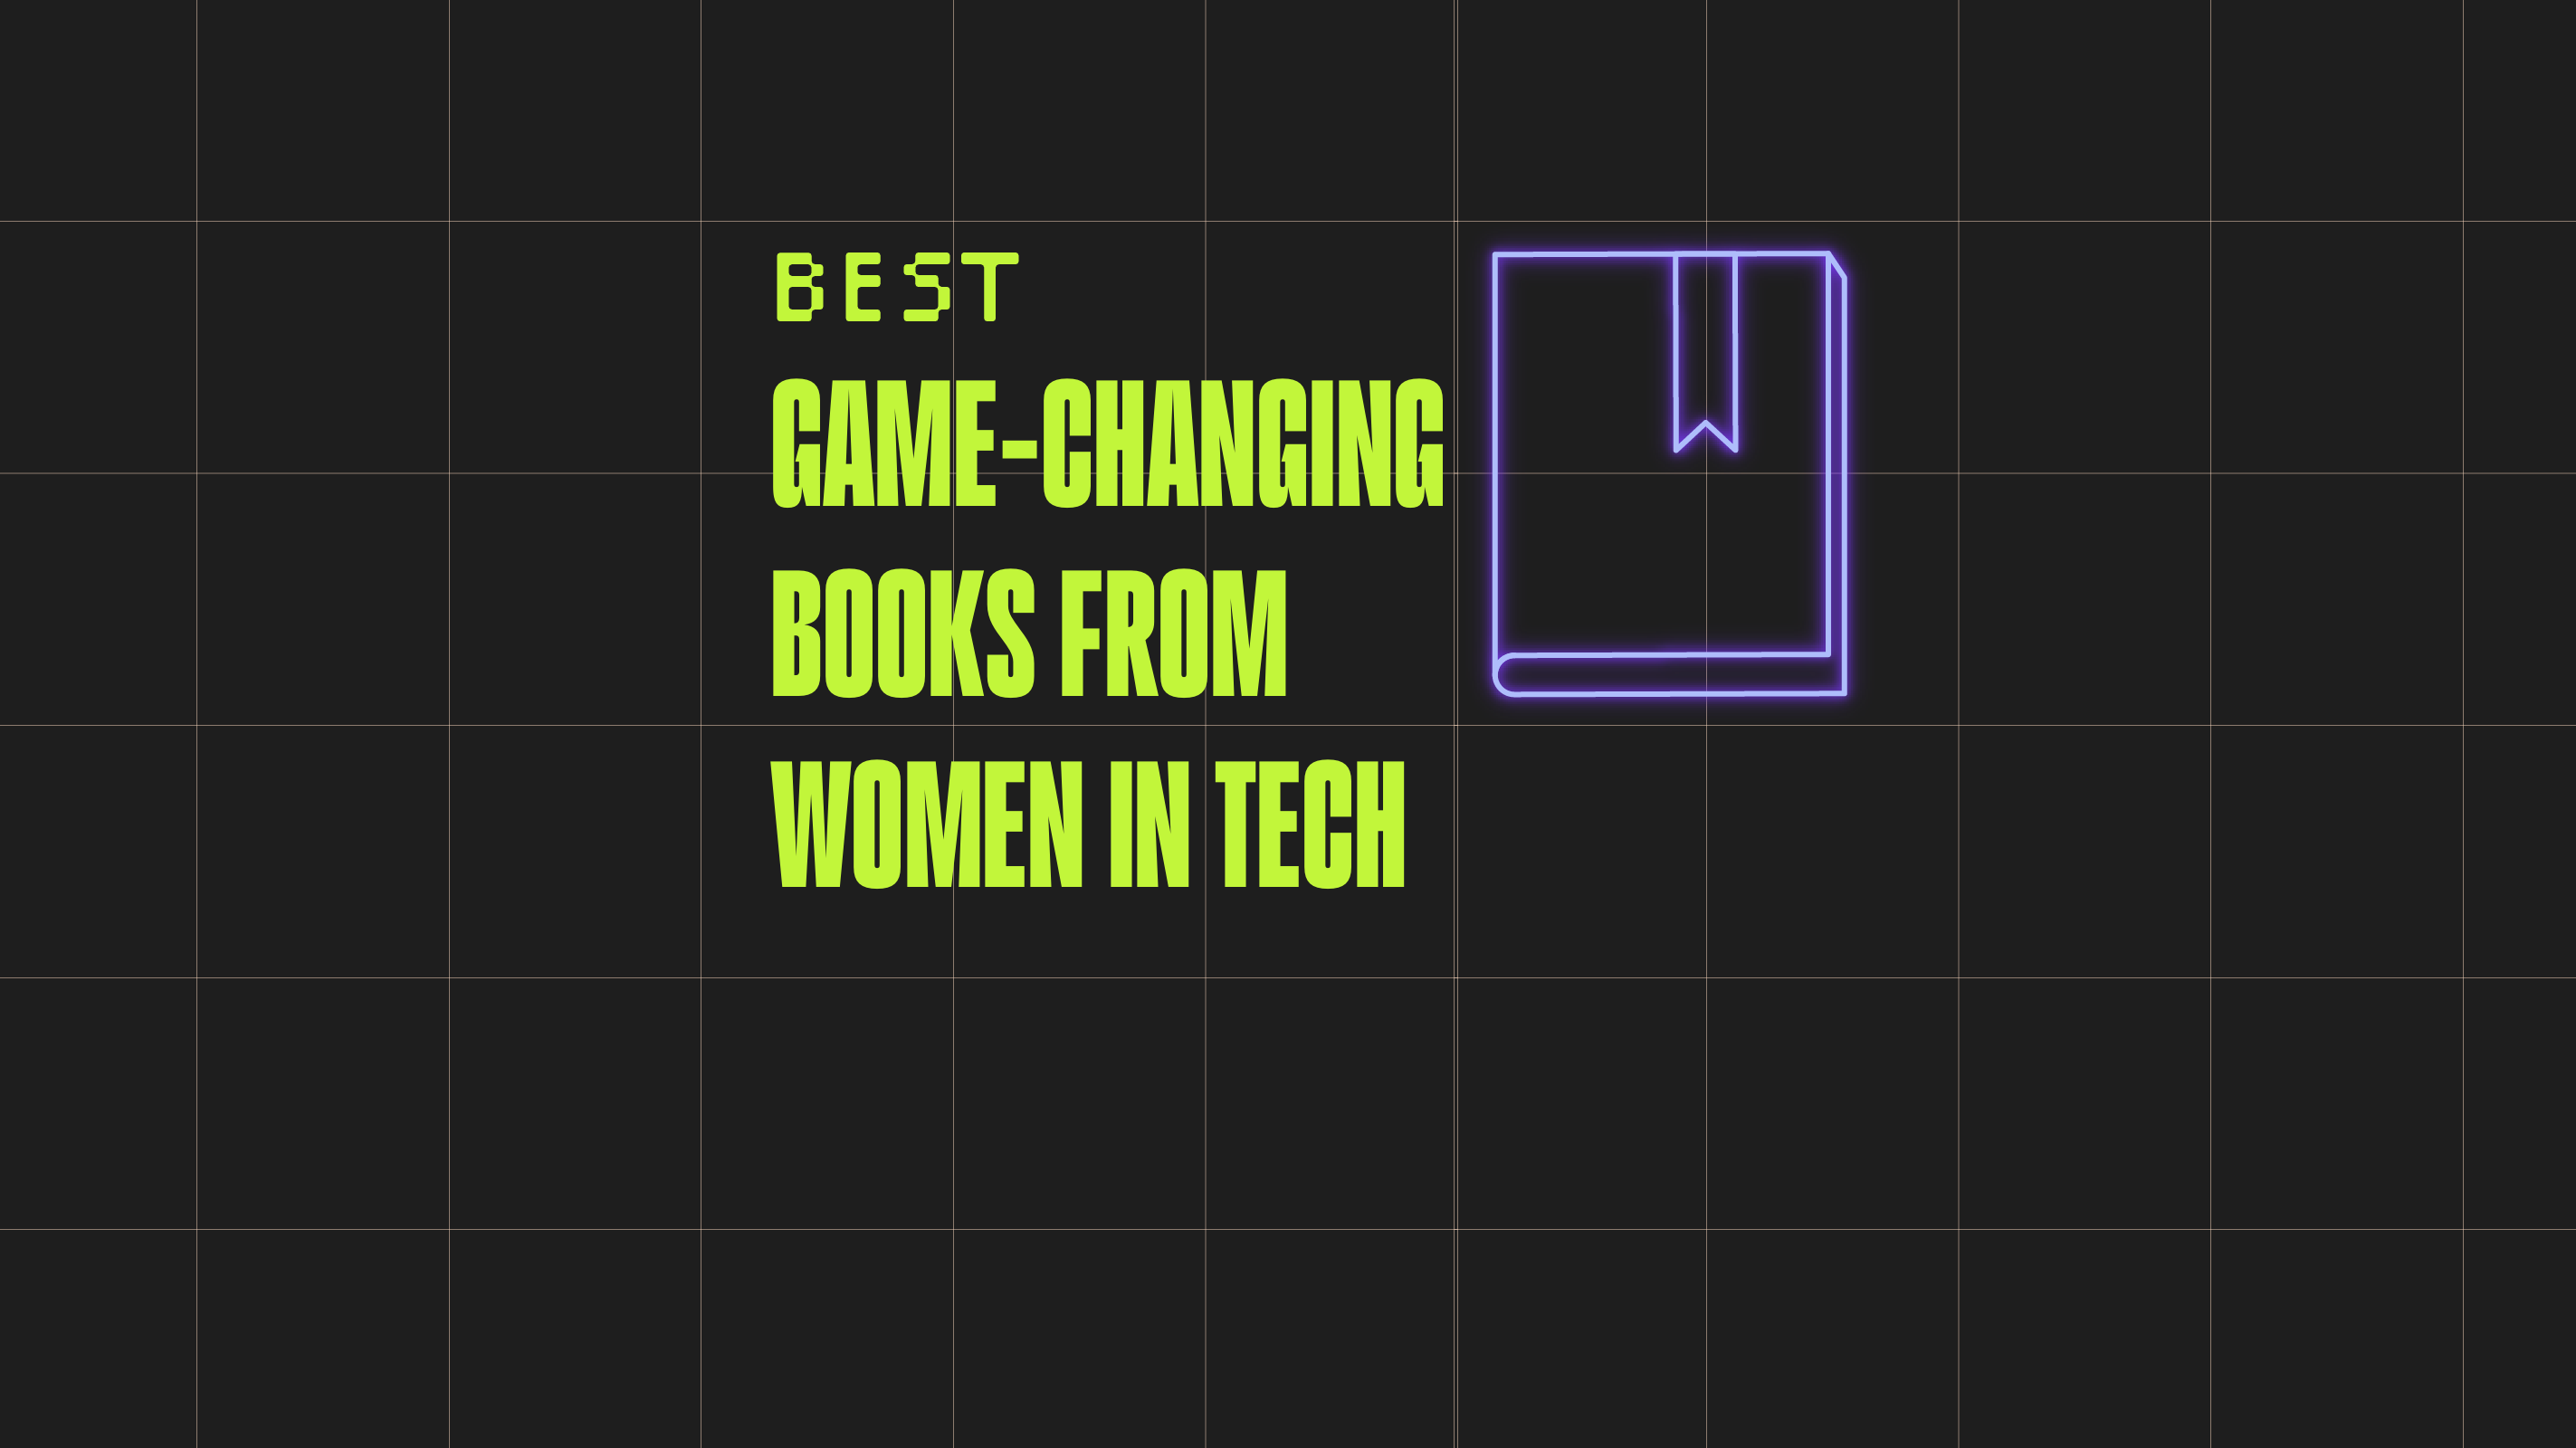 CTO-game-changing-books-from-women-in-tech-featured-image-6717